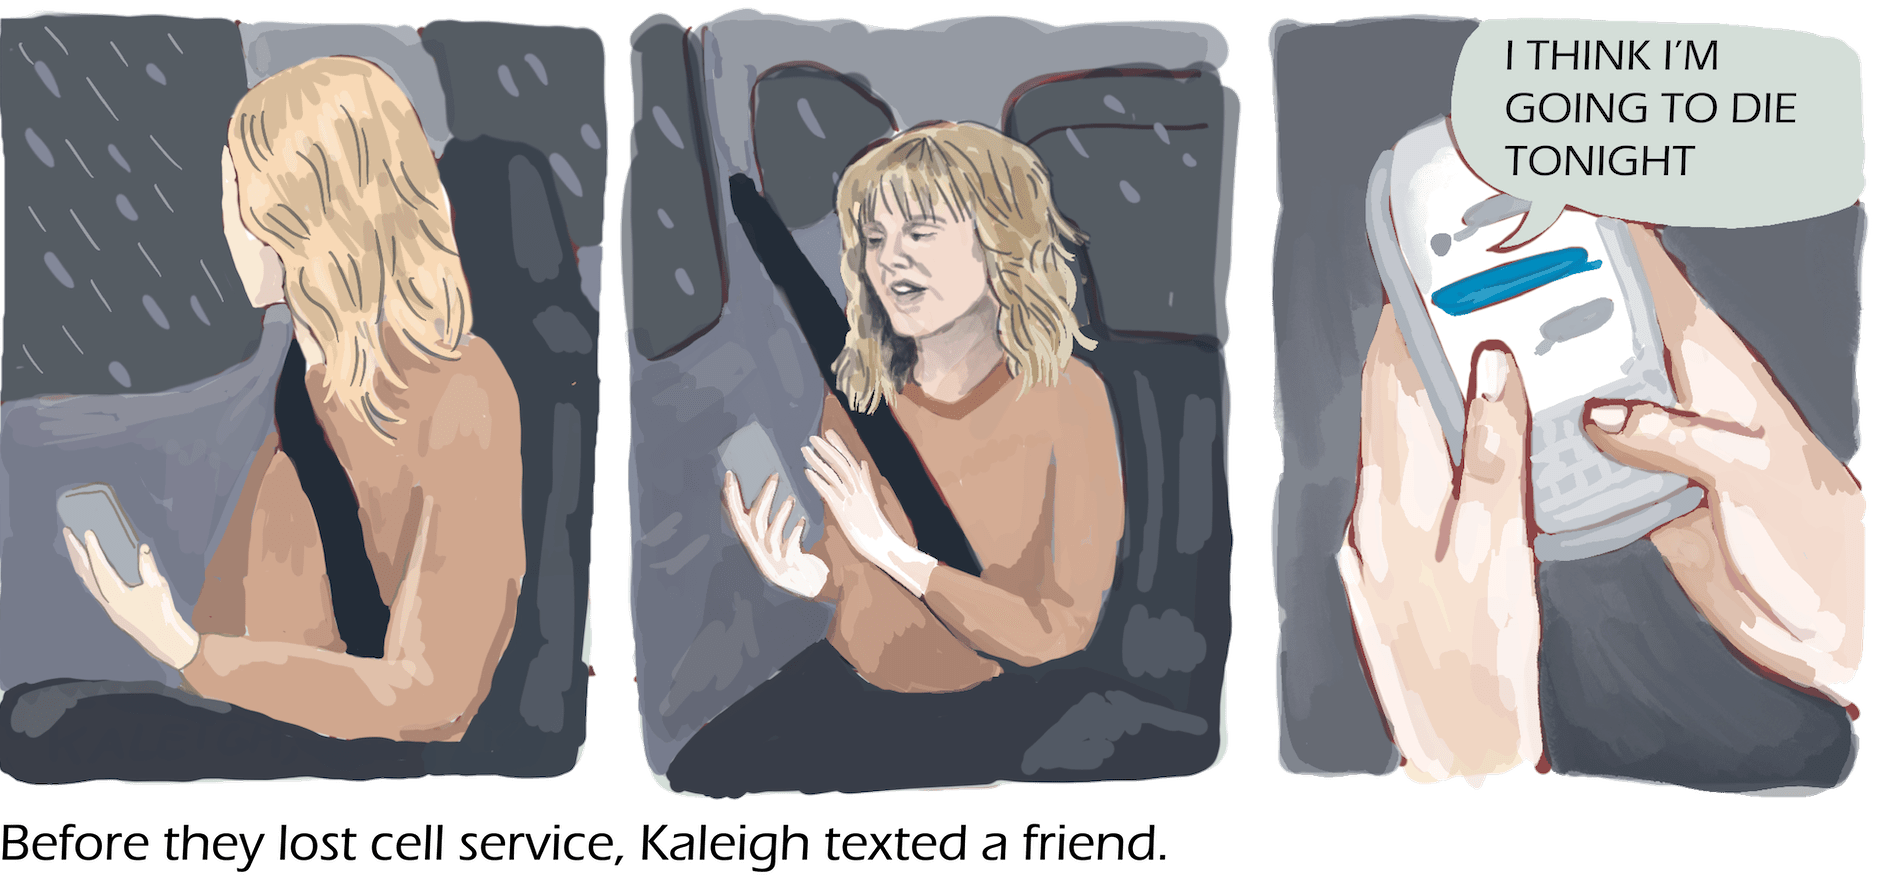 Three panel drawing showing a girl in the back seat of a car. She takes her phone and texts a friend. Text: Before they lost cell service, Kaleigh texted a friend, “I think I’m going to die tonight.”